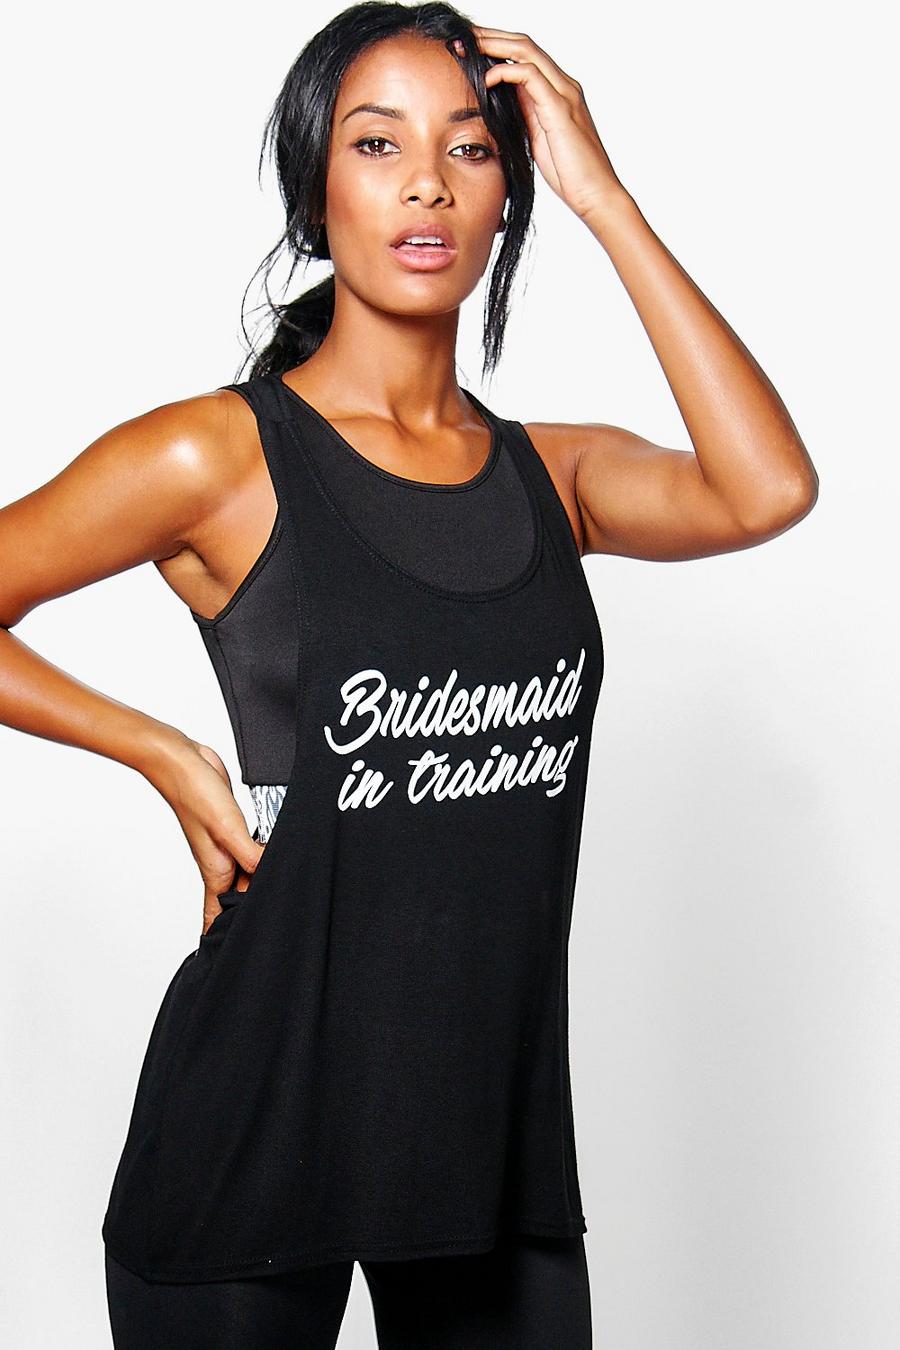 Leah Fit Bridesmaid In Training Running Tank Top image number 1